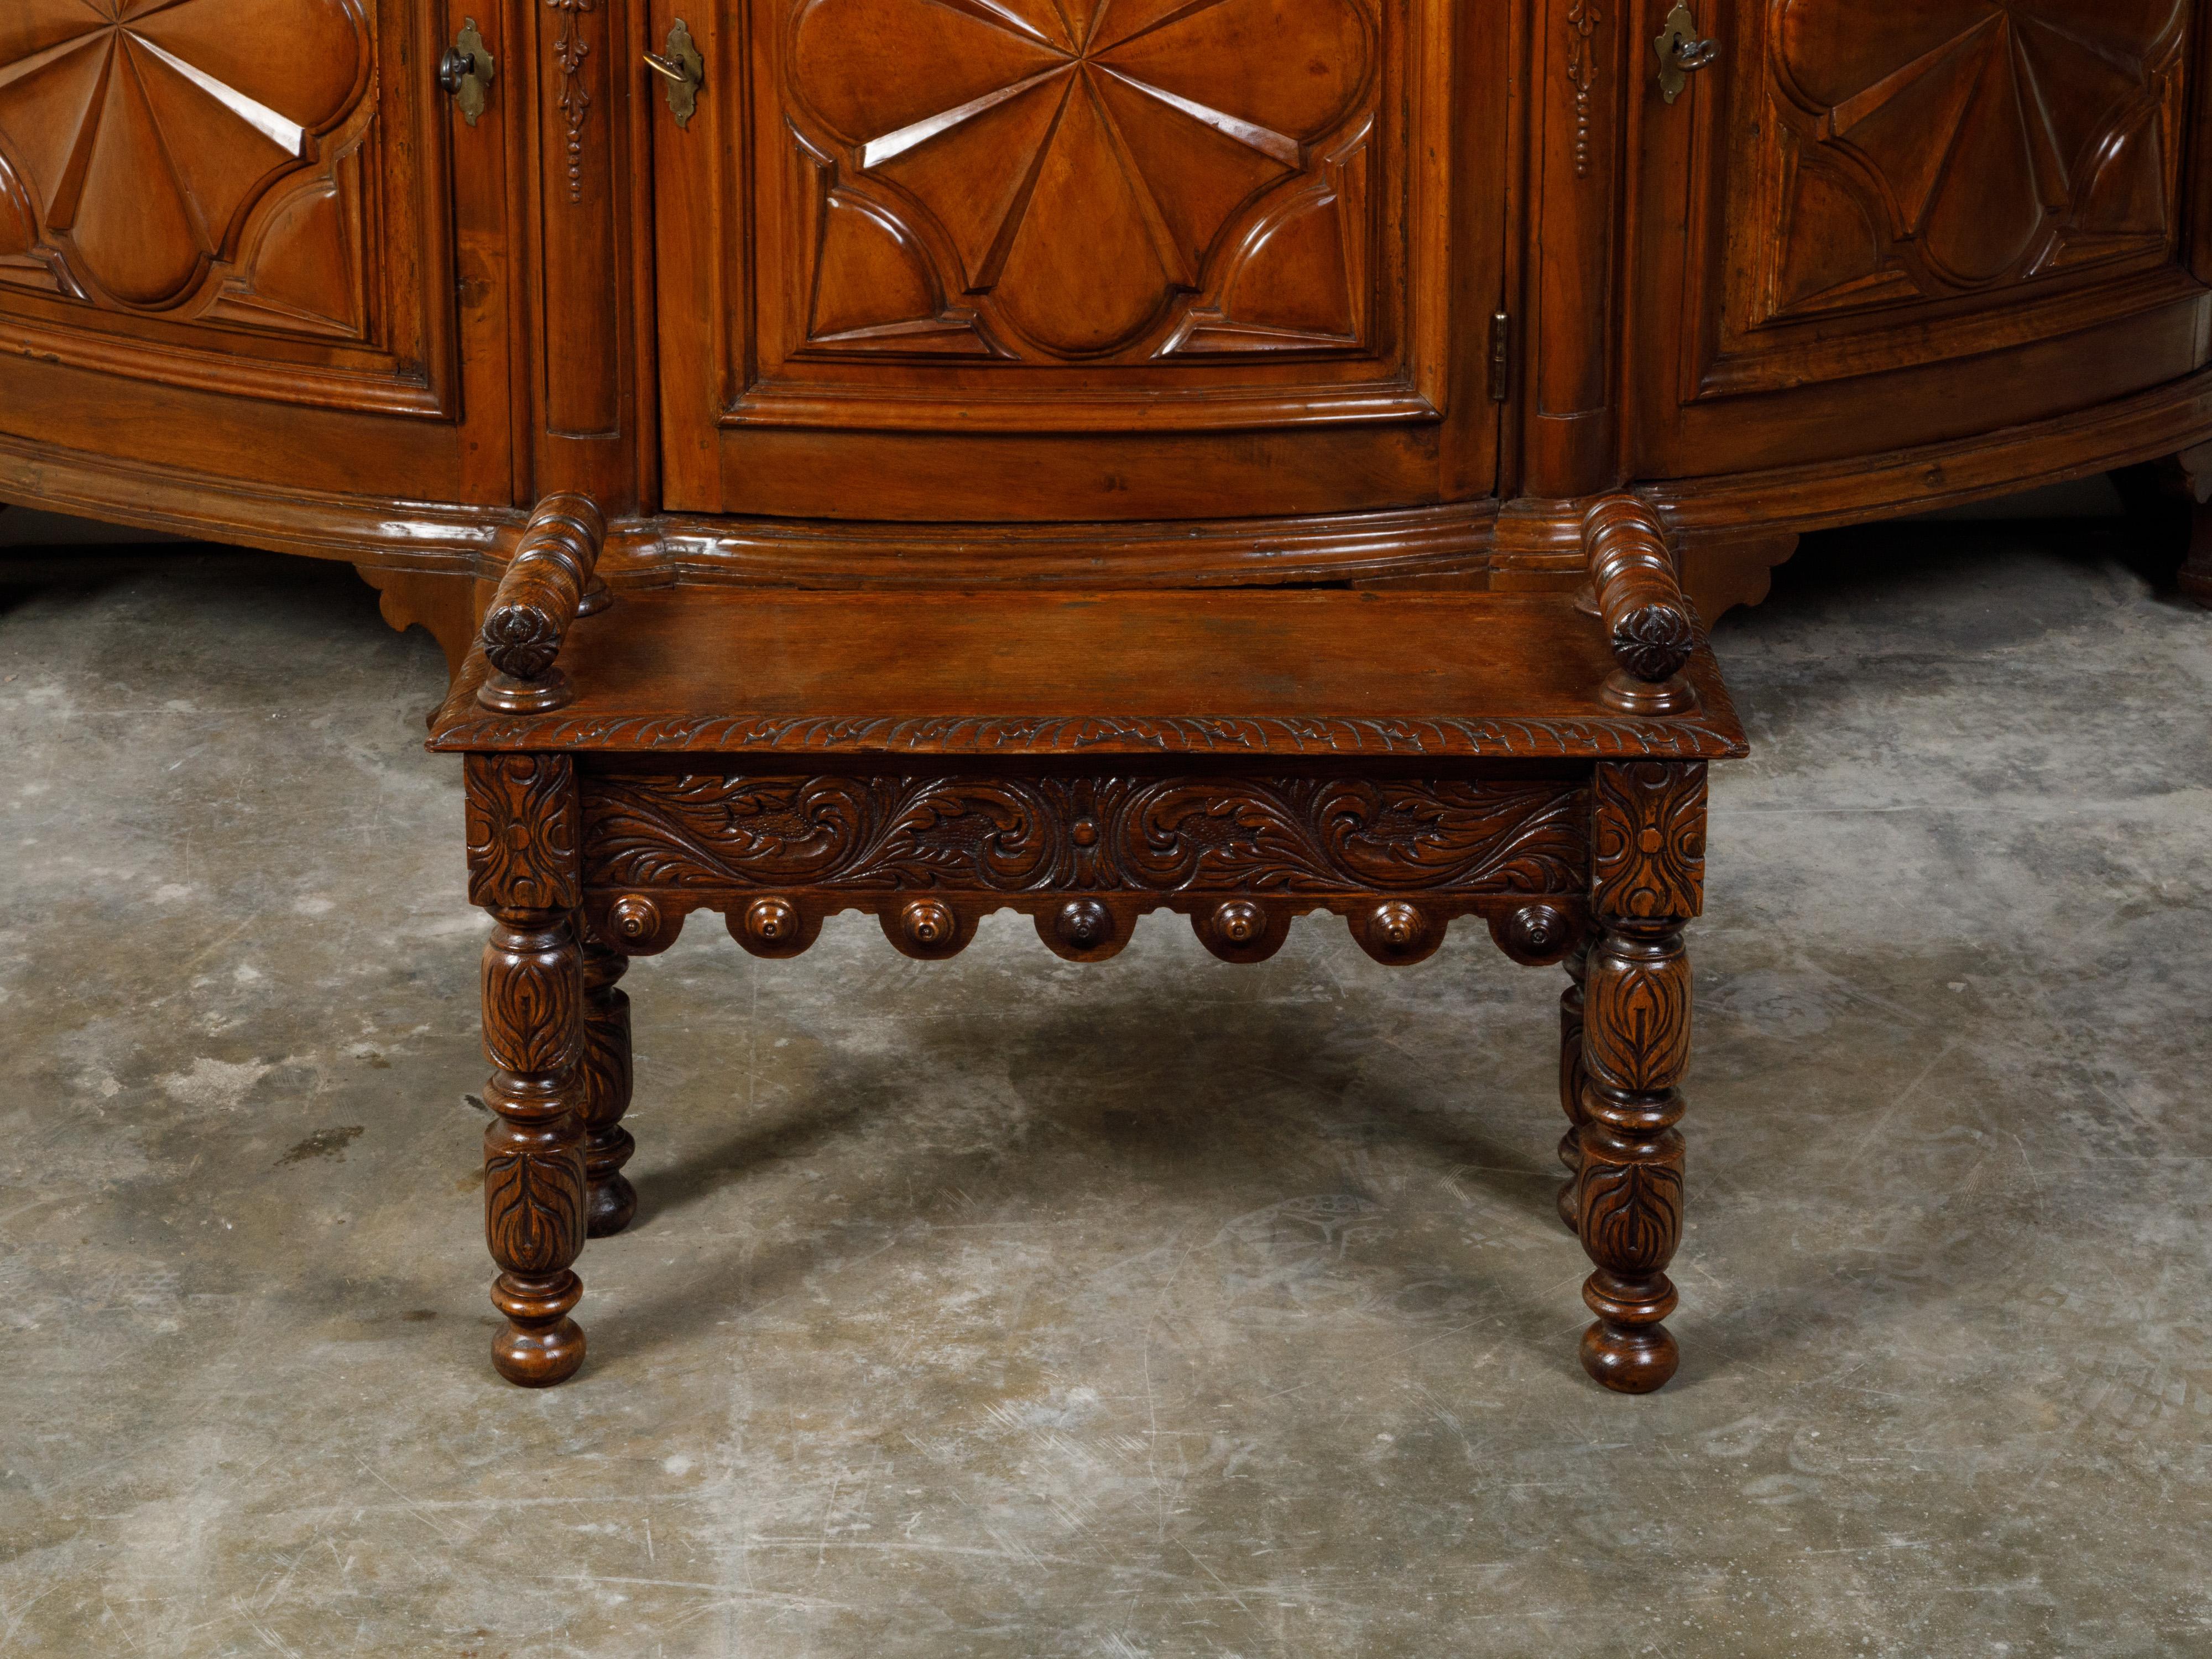 An English oak bench from the late 19th century, with carved foliage and cylindrical armrests. Created in England during the last quarter of the 19th century, this oak hall bench features a rectangular seat with carved edges, accented with two